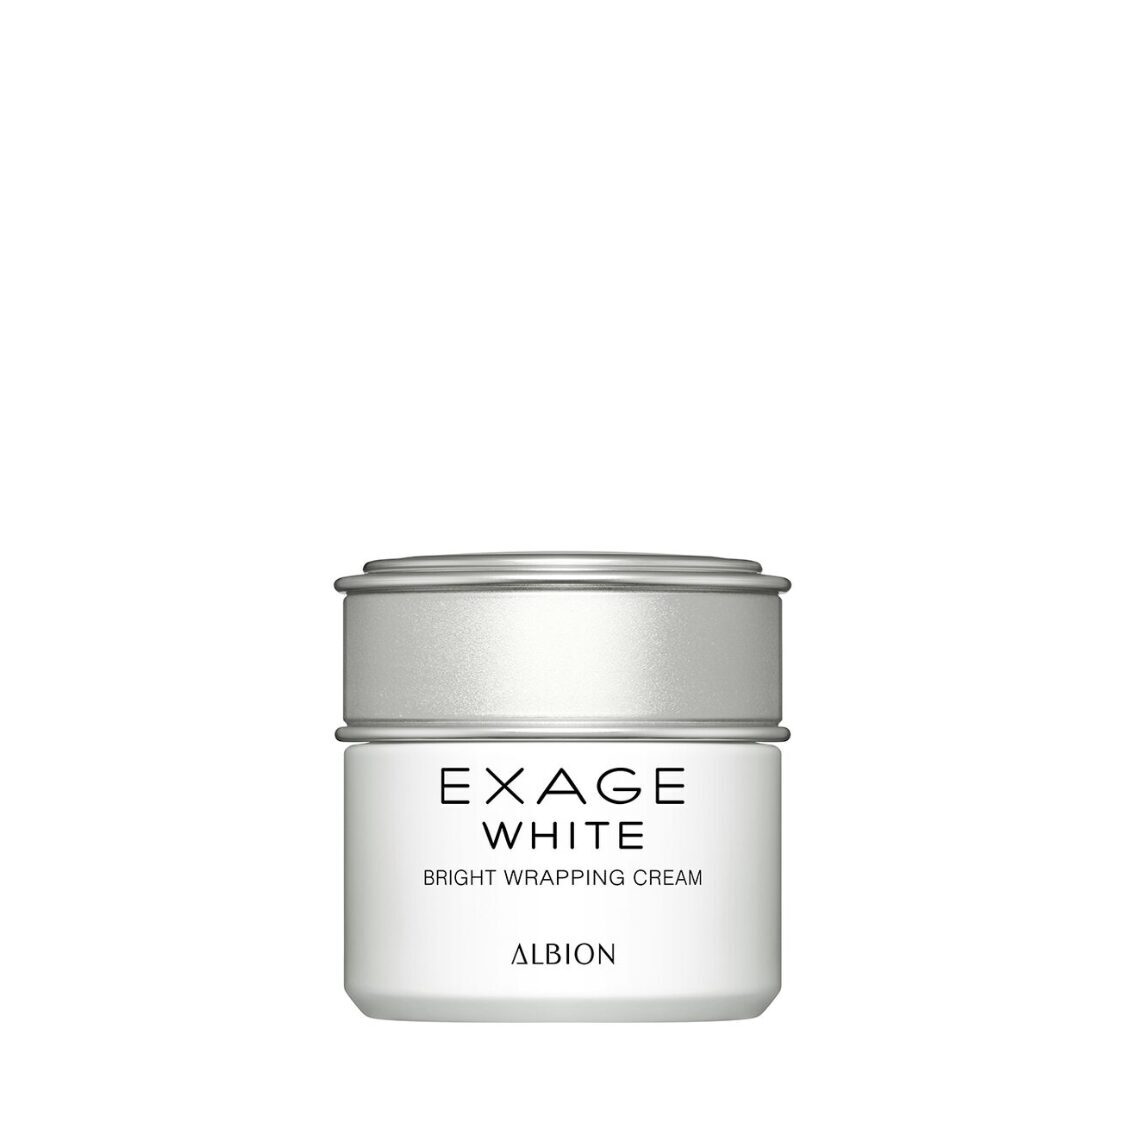 ALBION EXAGE WHITE Bright Wrapping Cream 30g